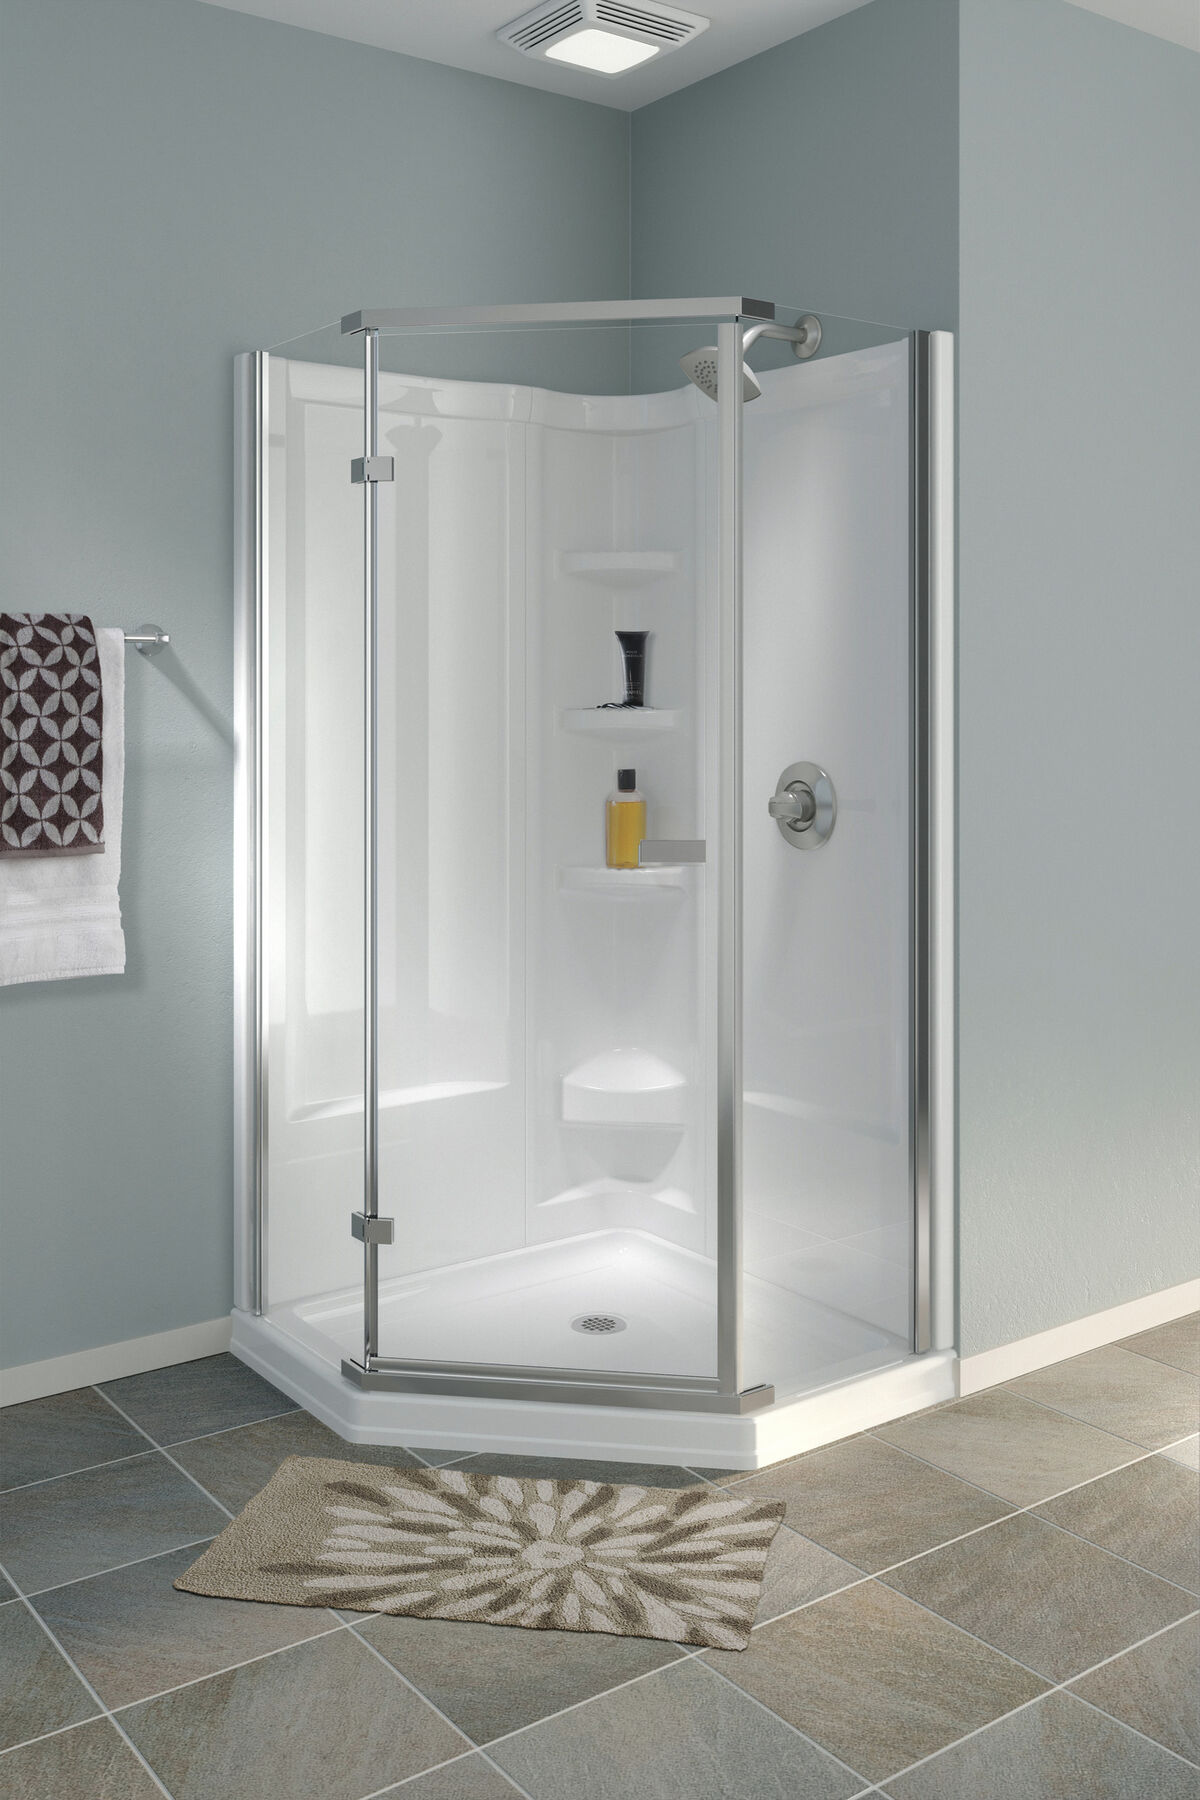 Delta Classic 38 in. W x 72 in. H Neo-Angle Pivot Semi Frameless Corner  Shower Enclosure in Stainless 422061 - The Home Depot